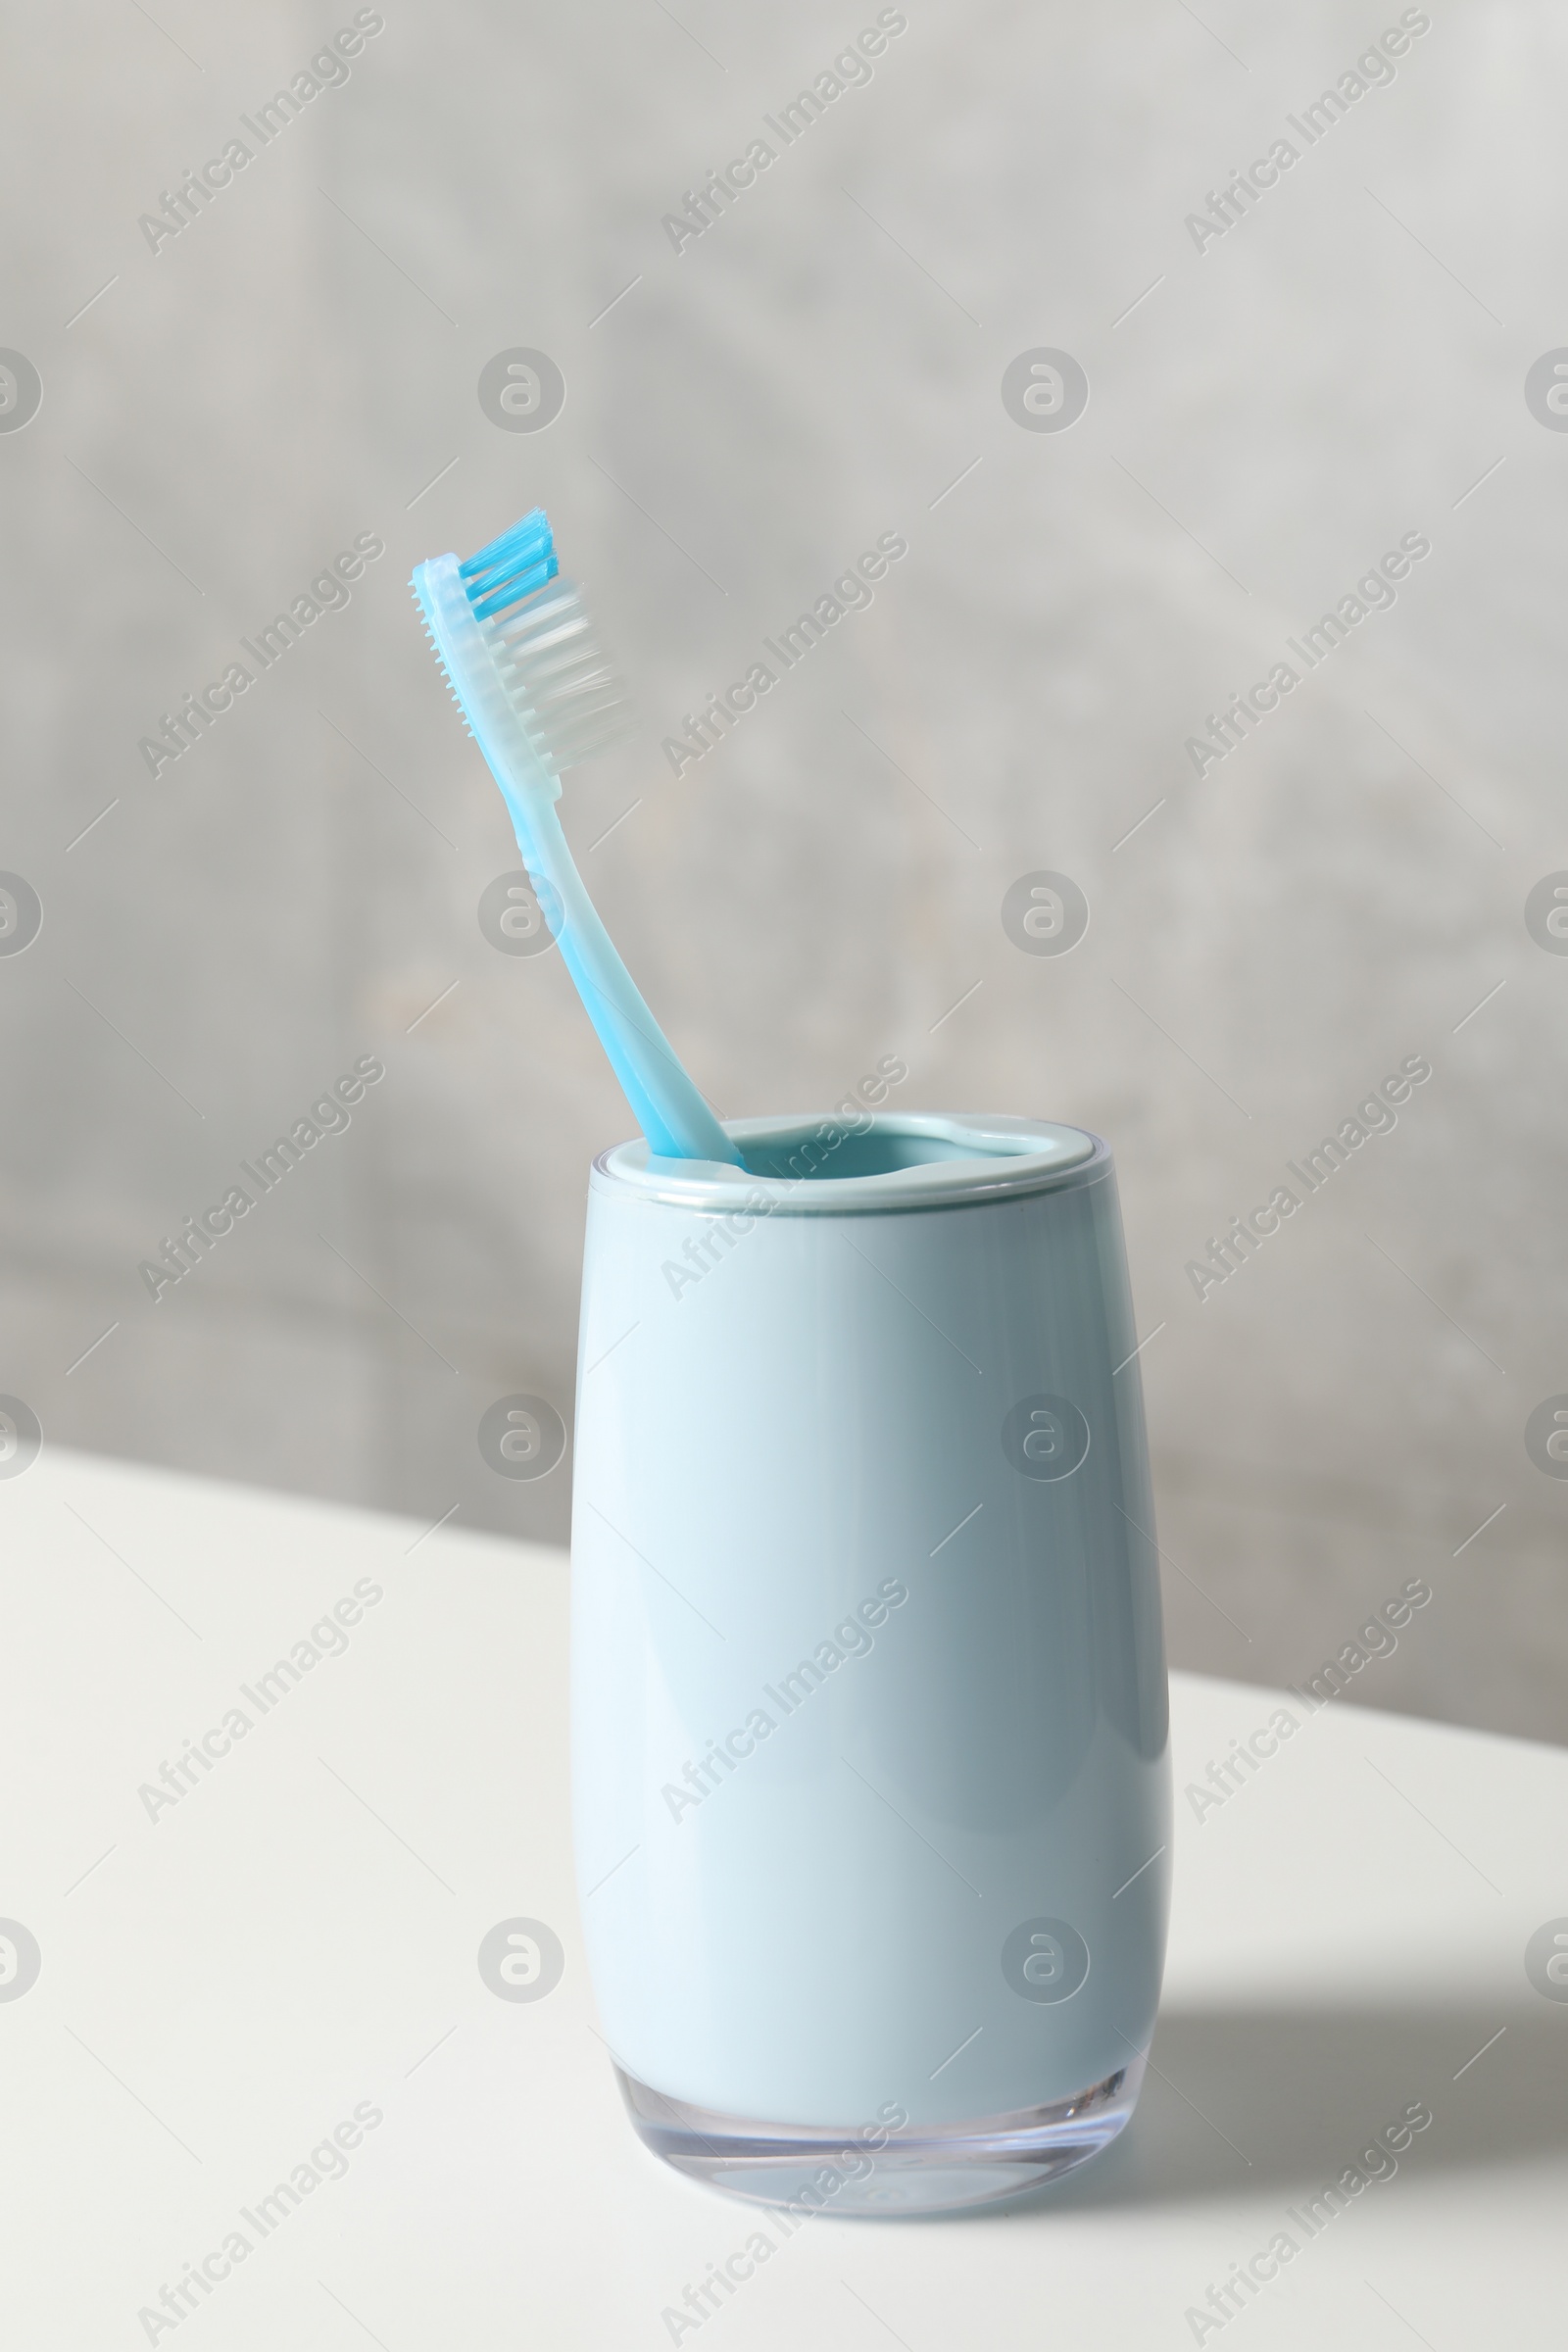 Photo of Plastic toothbrush in holder on white countertop